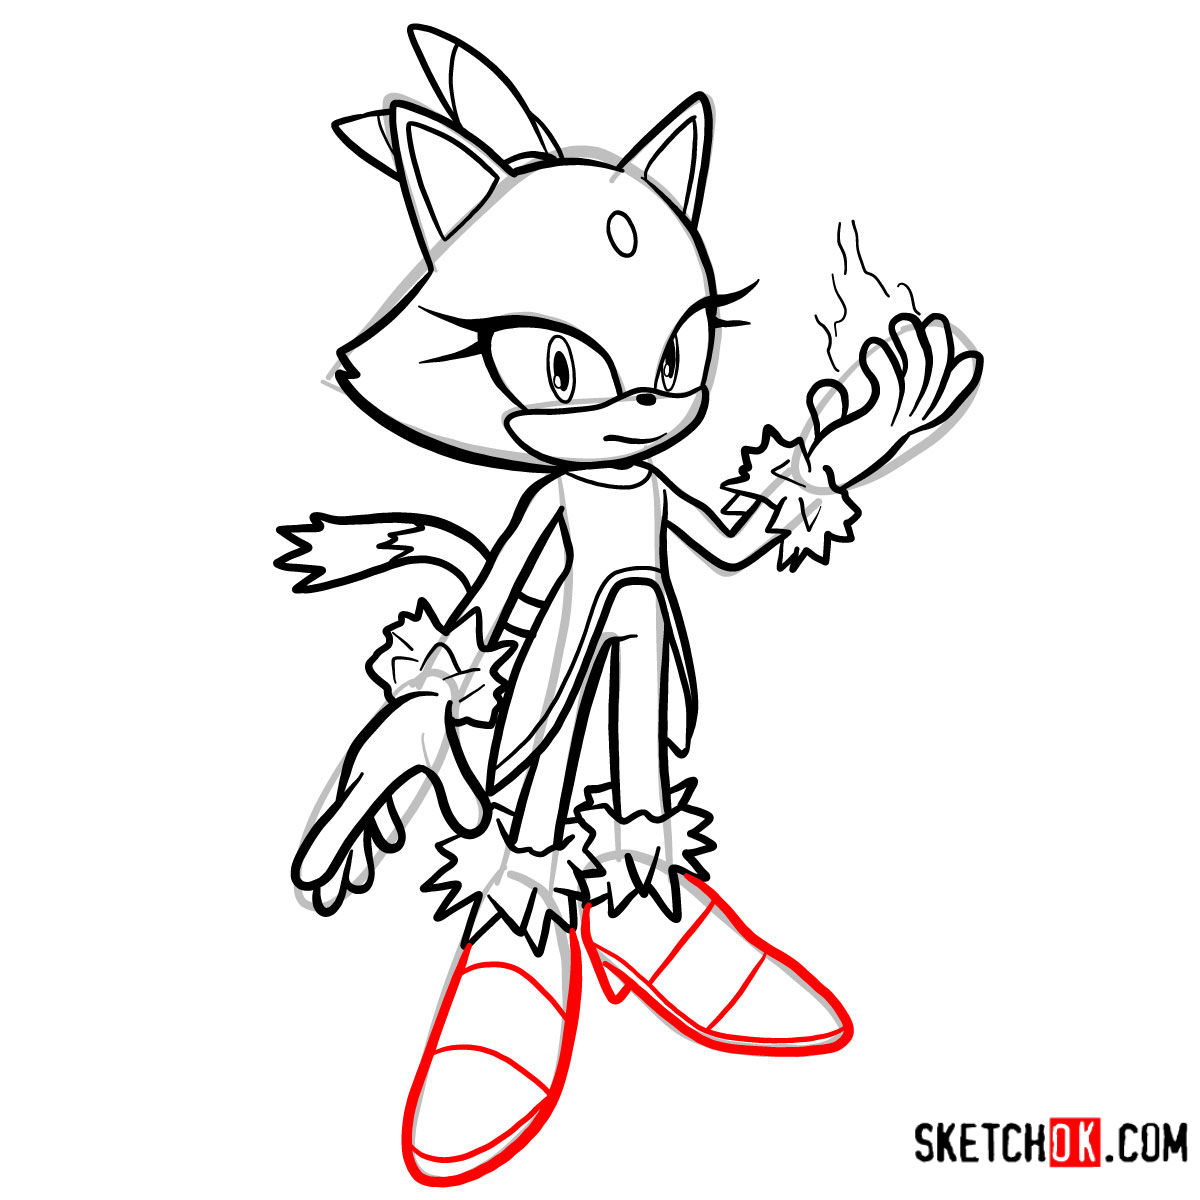 How to draw Blaze the Cat Sonic the Hedgehog Step by step drawing